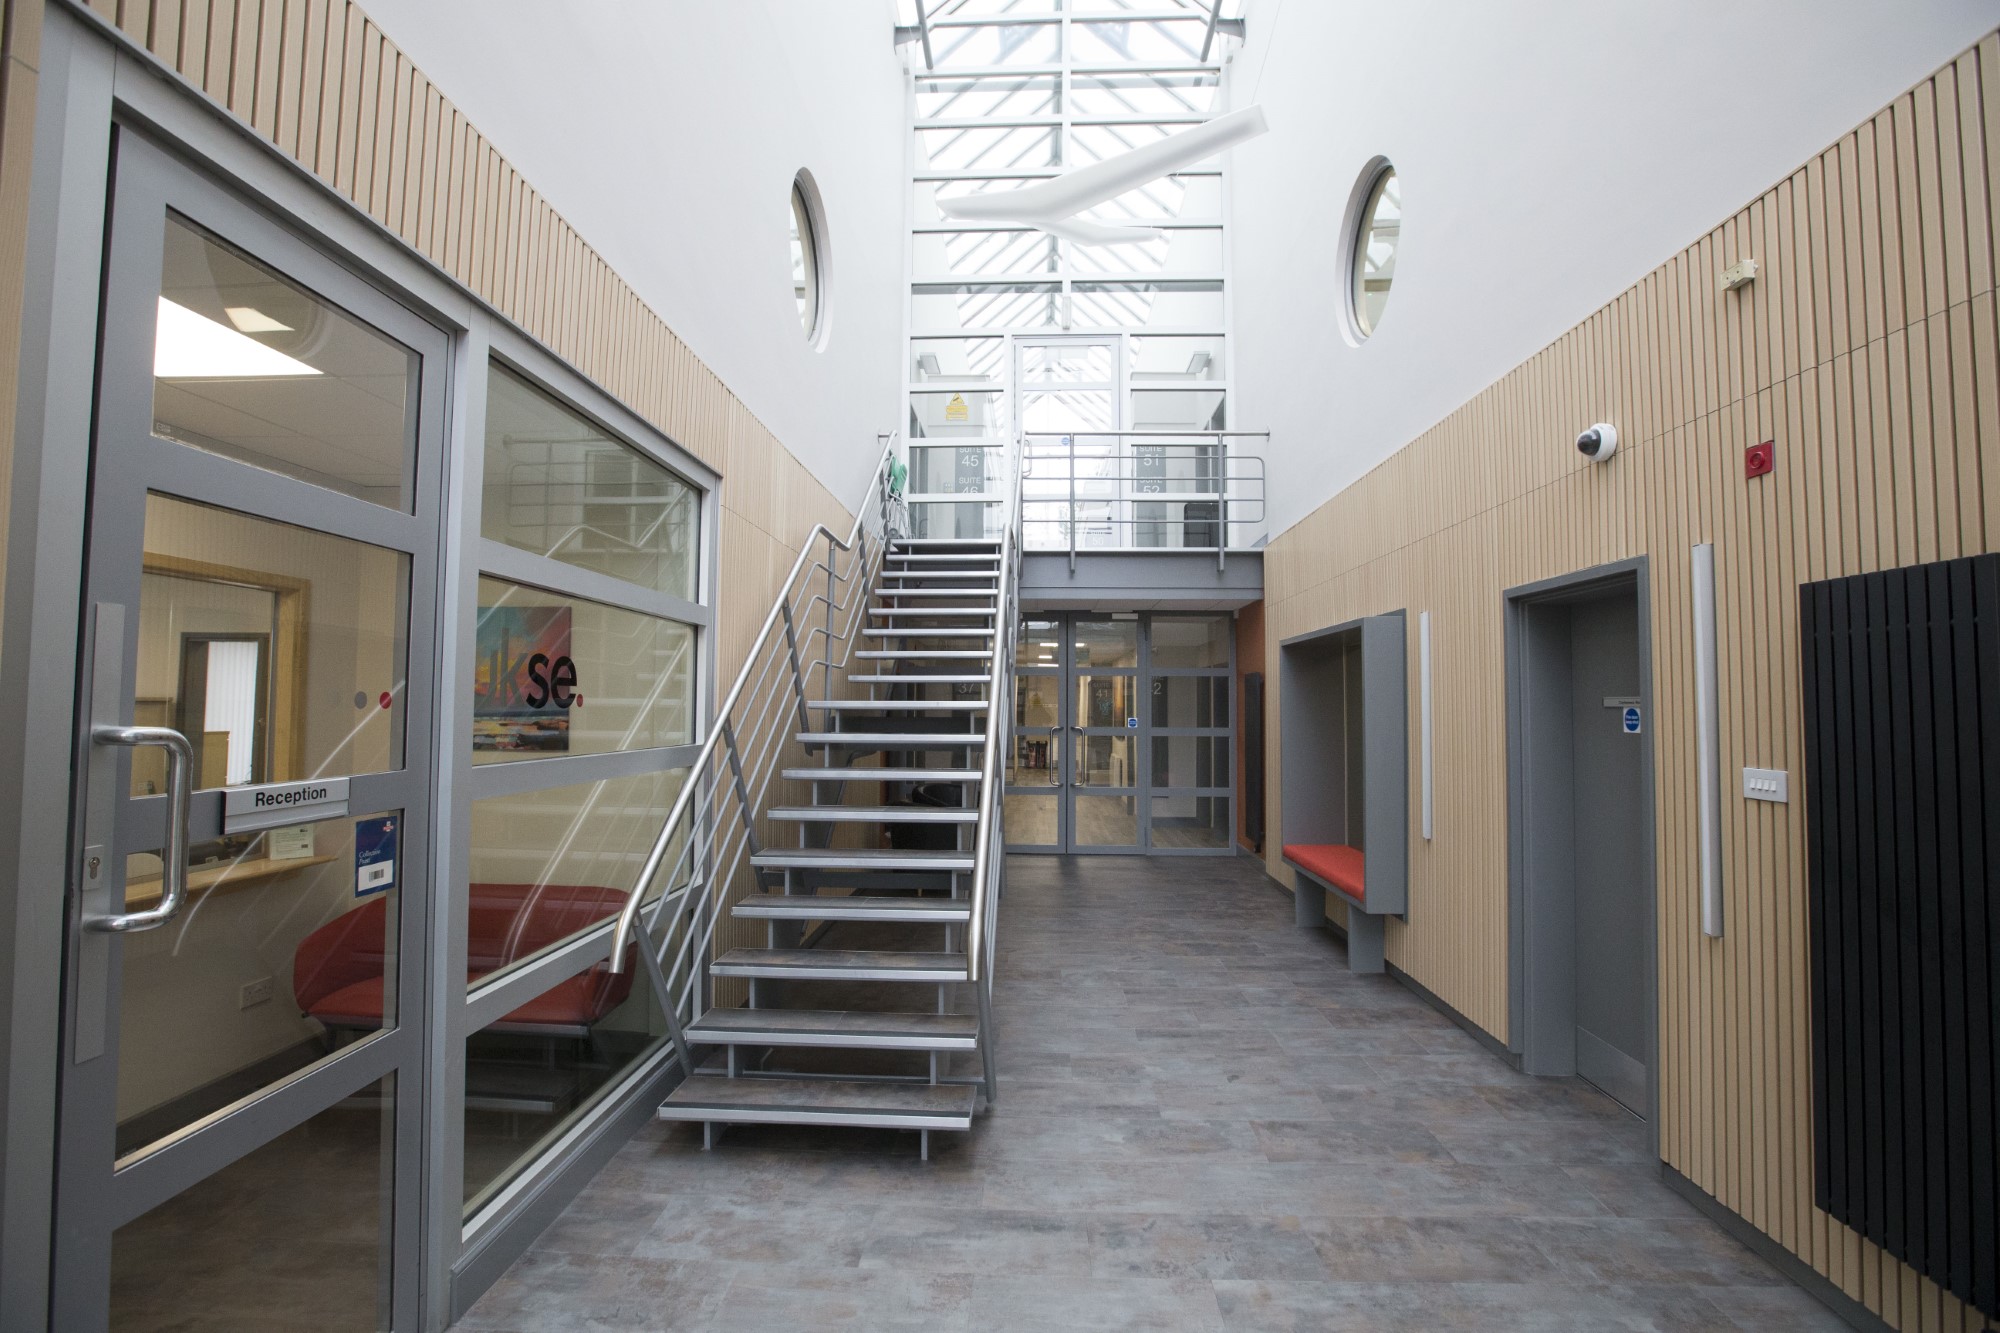 A hallway next to the reception which is lined with office spaces to rent at the Strathclyde Business Park